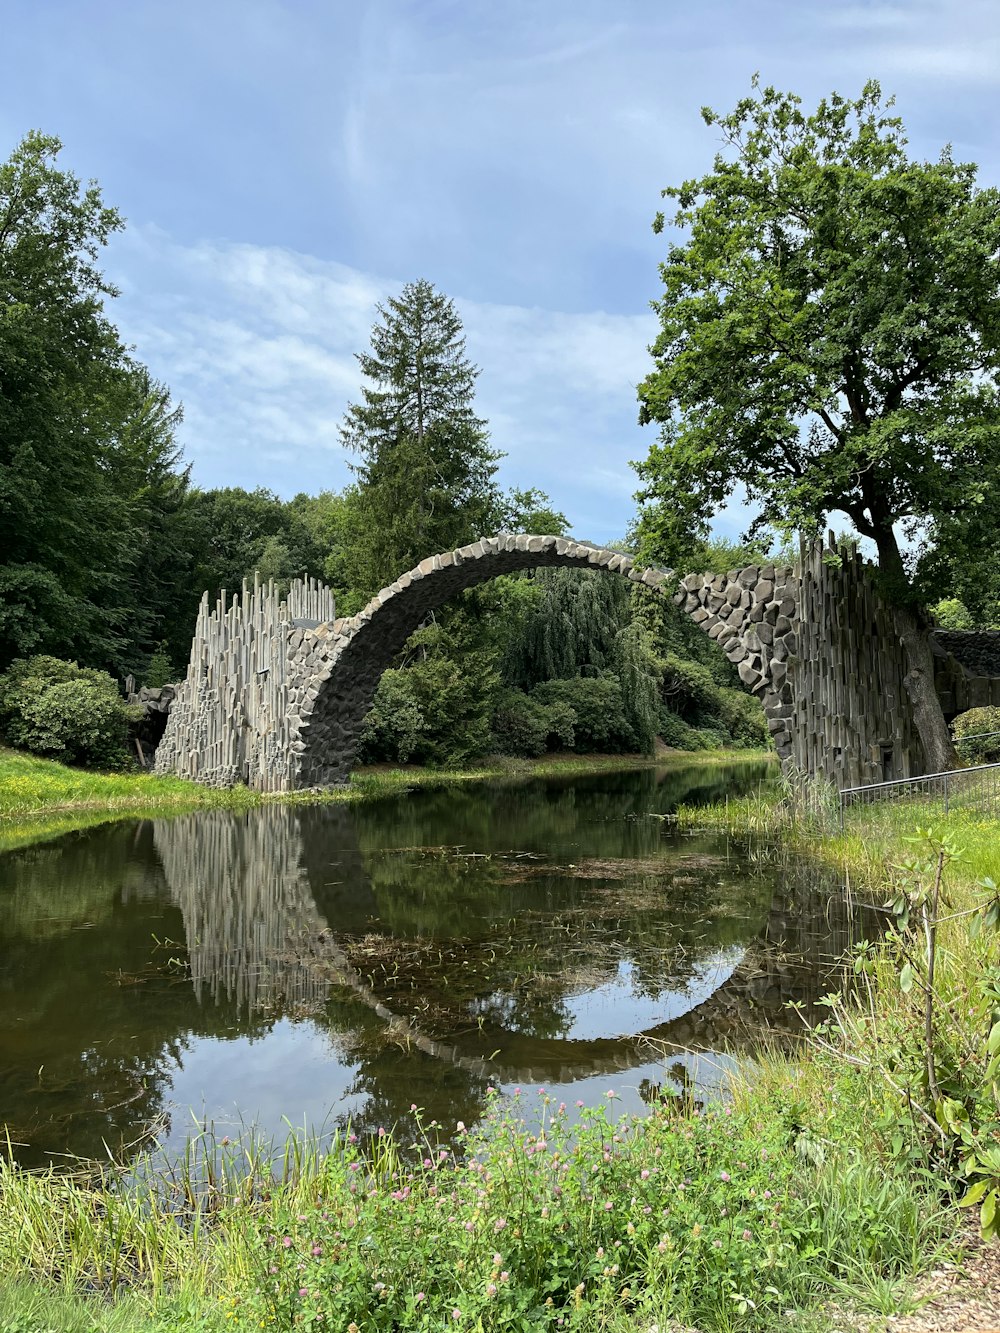 a stone bridge over a pond in a park